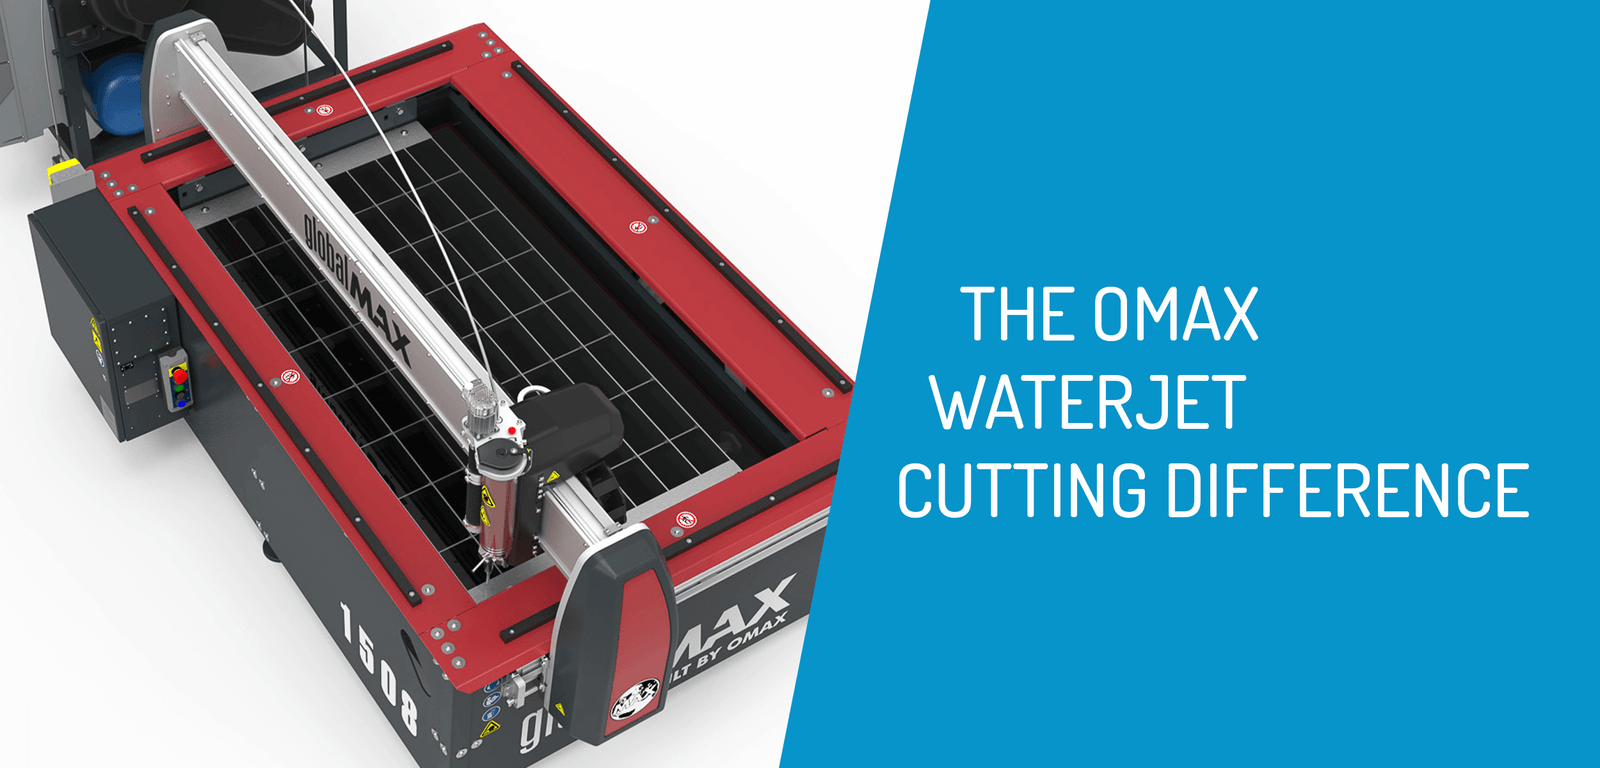 The OMAX Waterjet Machine Cutting Difference